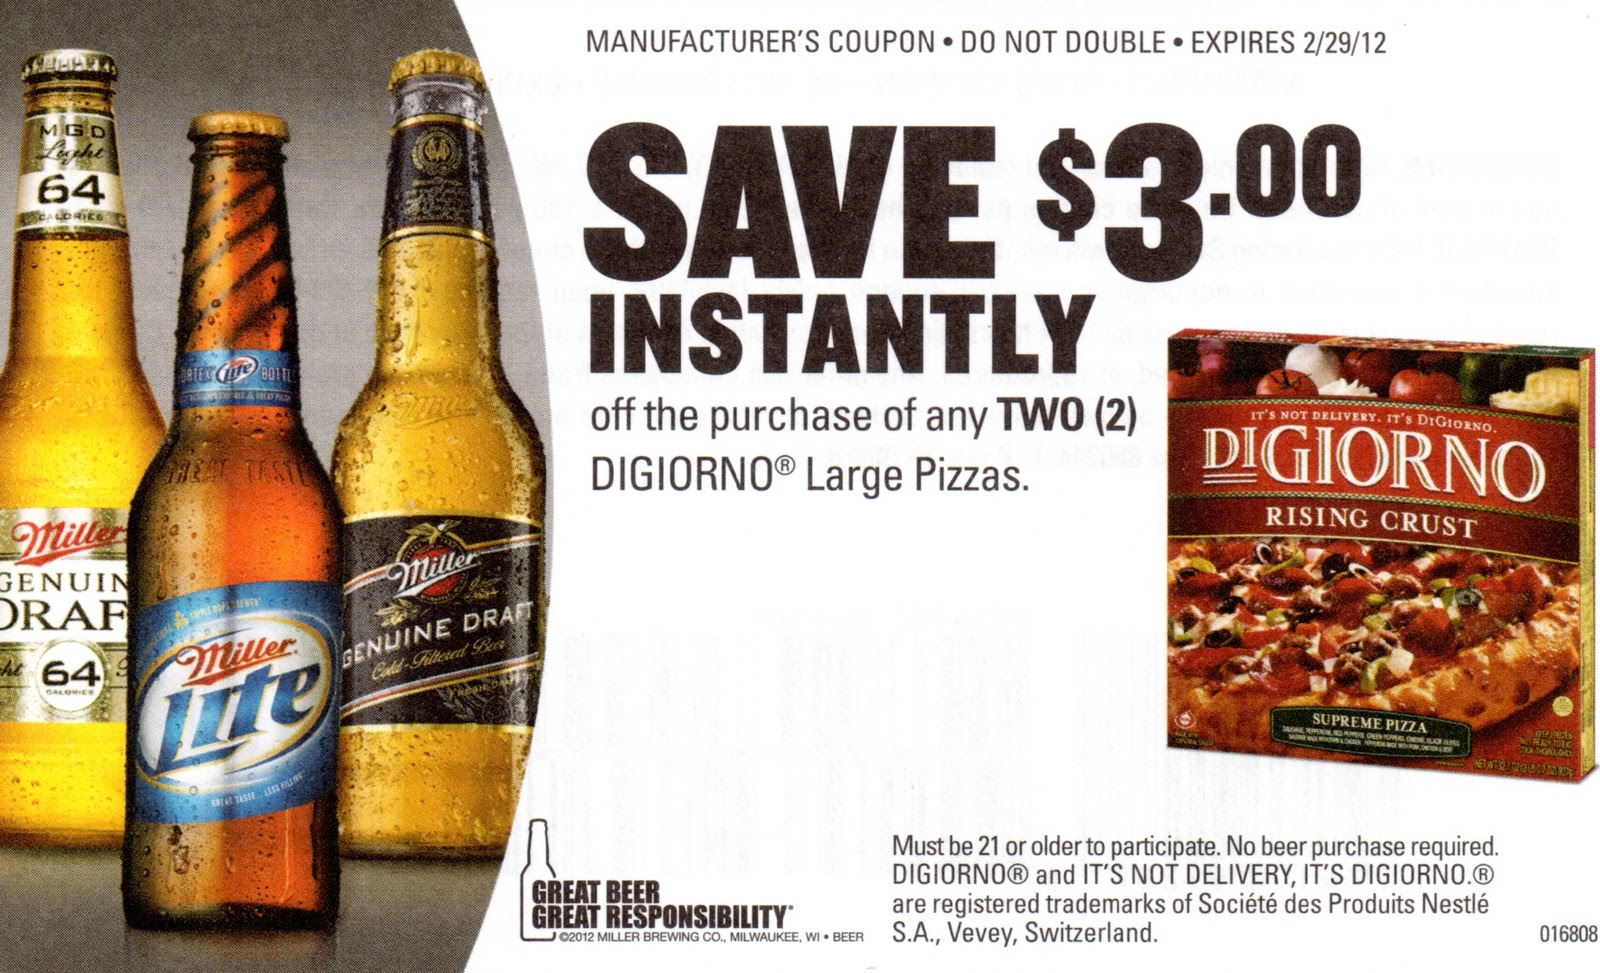 coupon-stl-3-2-digiorno-large-pizza-tearpad-coupon